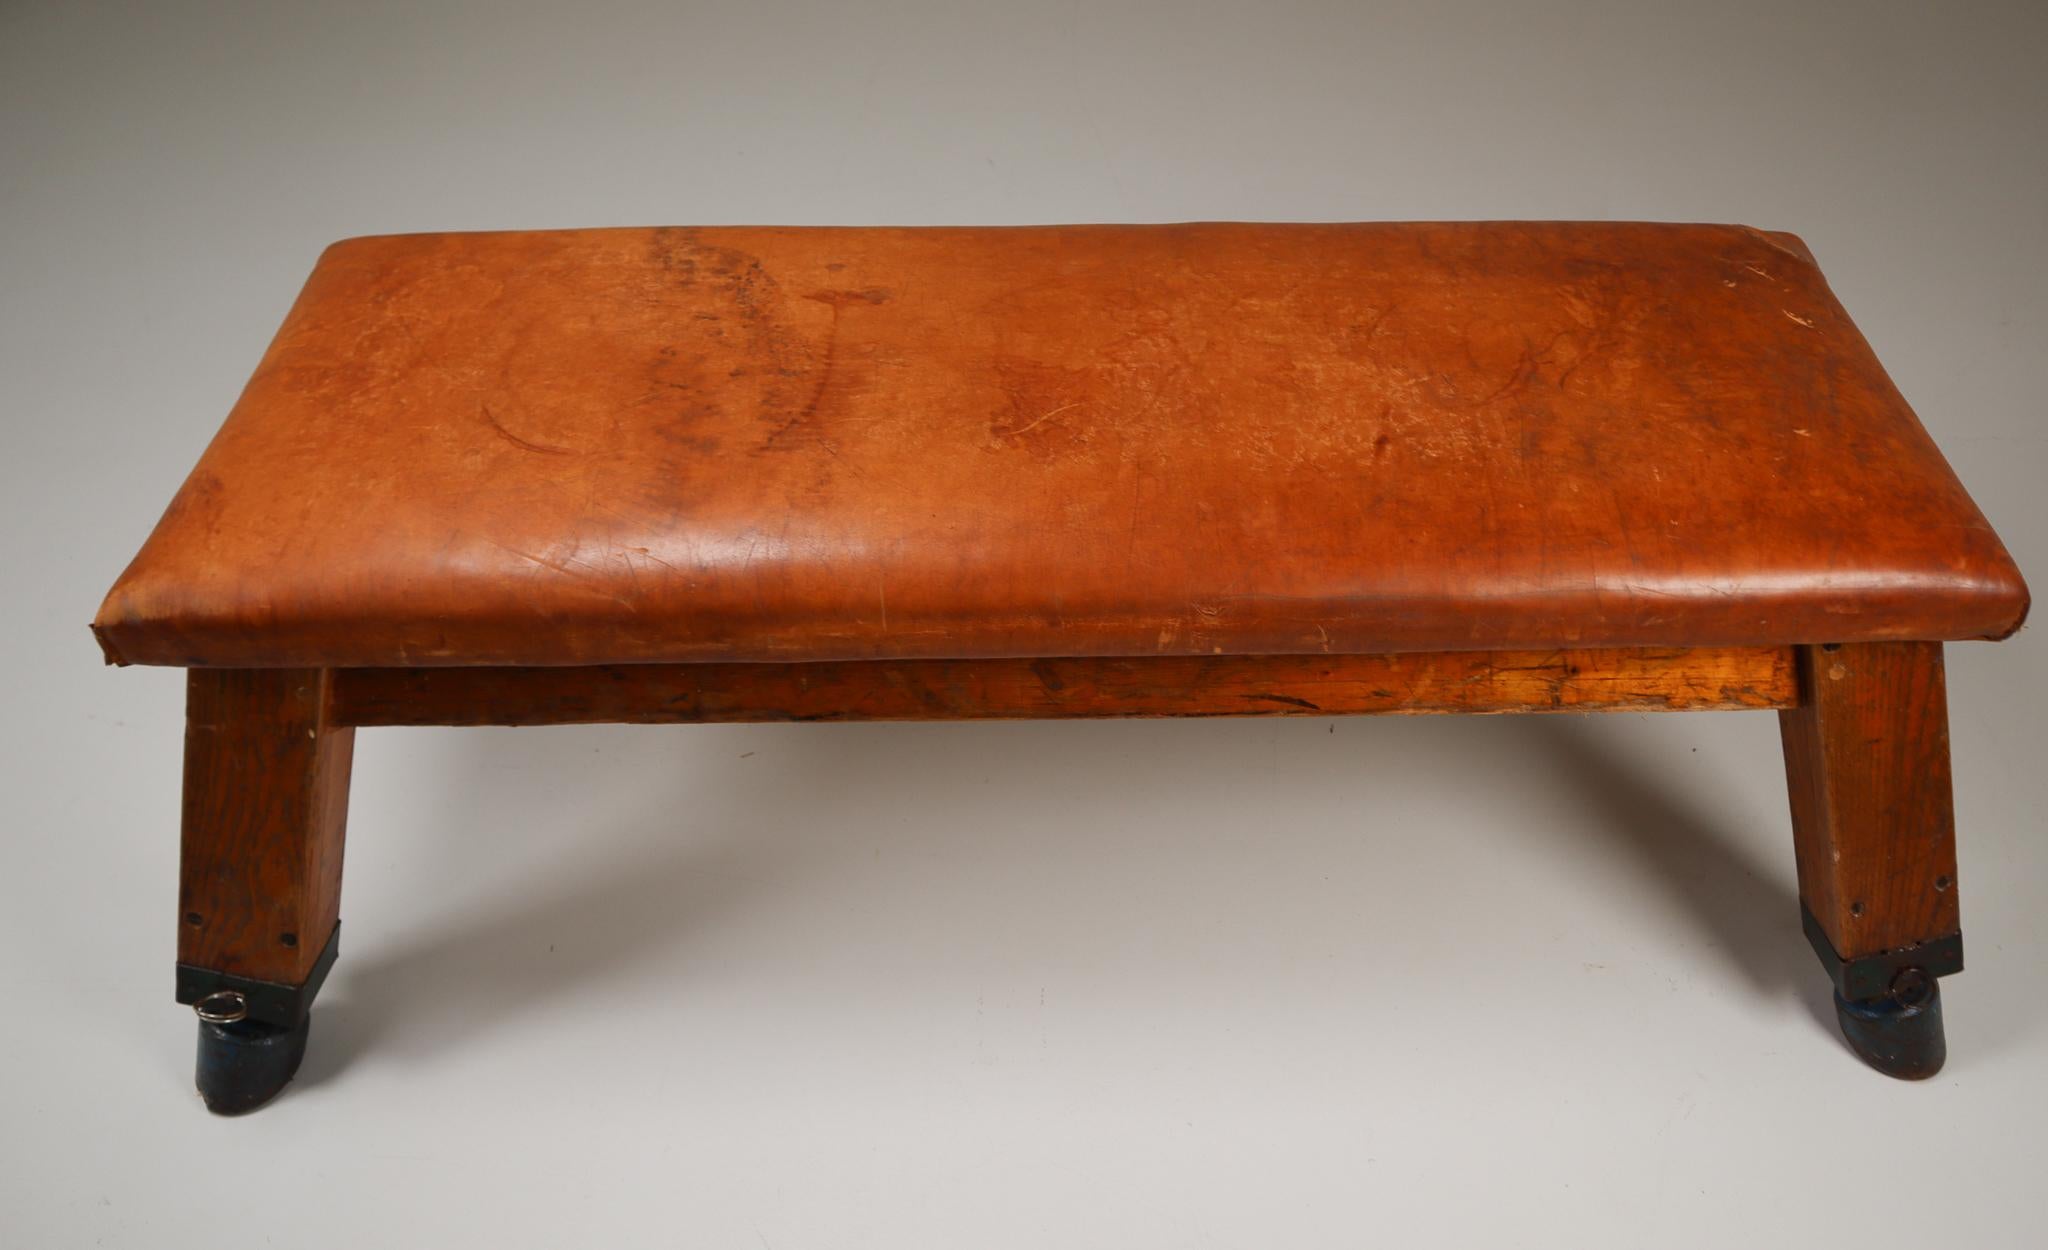 20th Century Wooden Patinated Leather Gym Bench or Table, circa 1950s